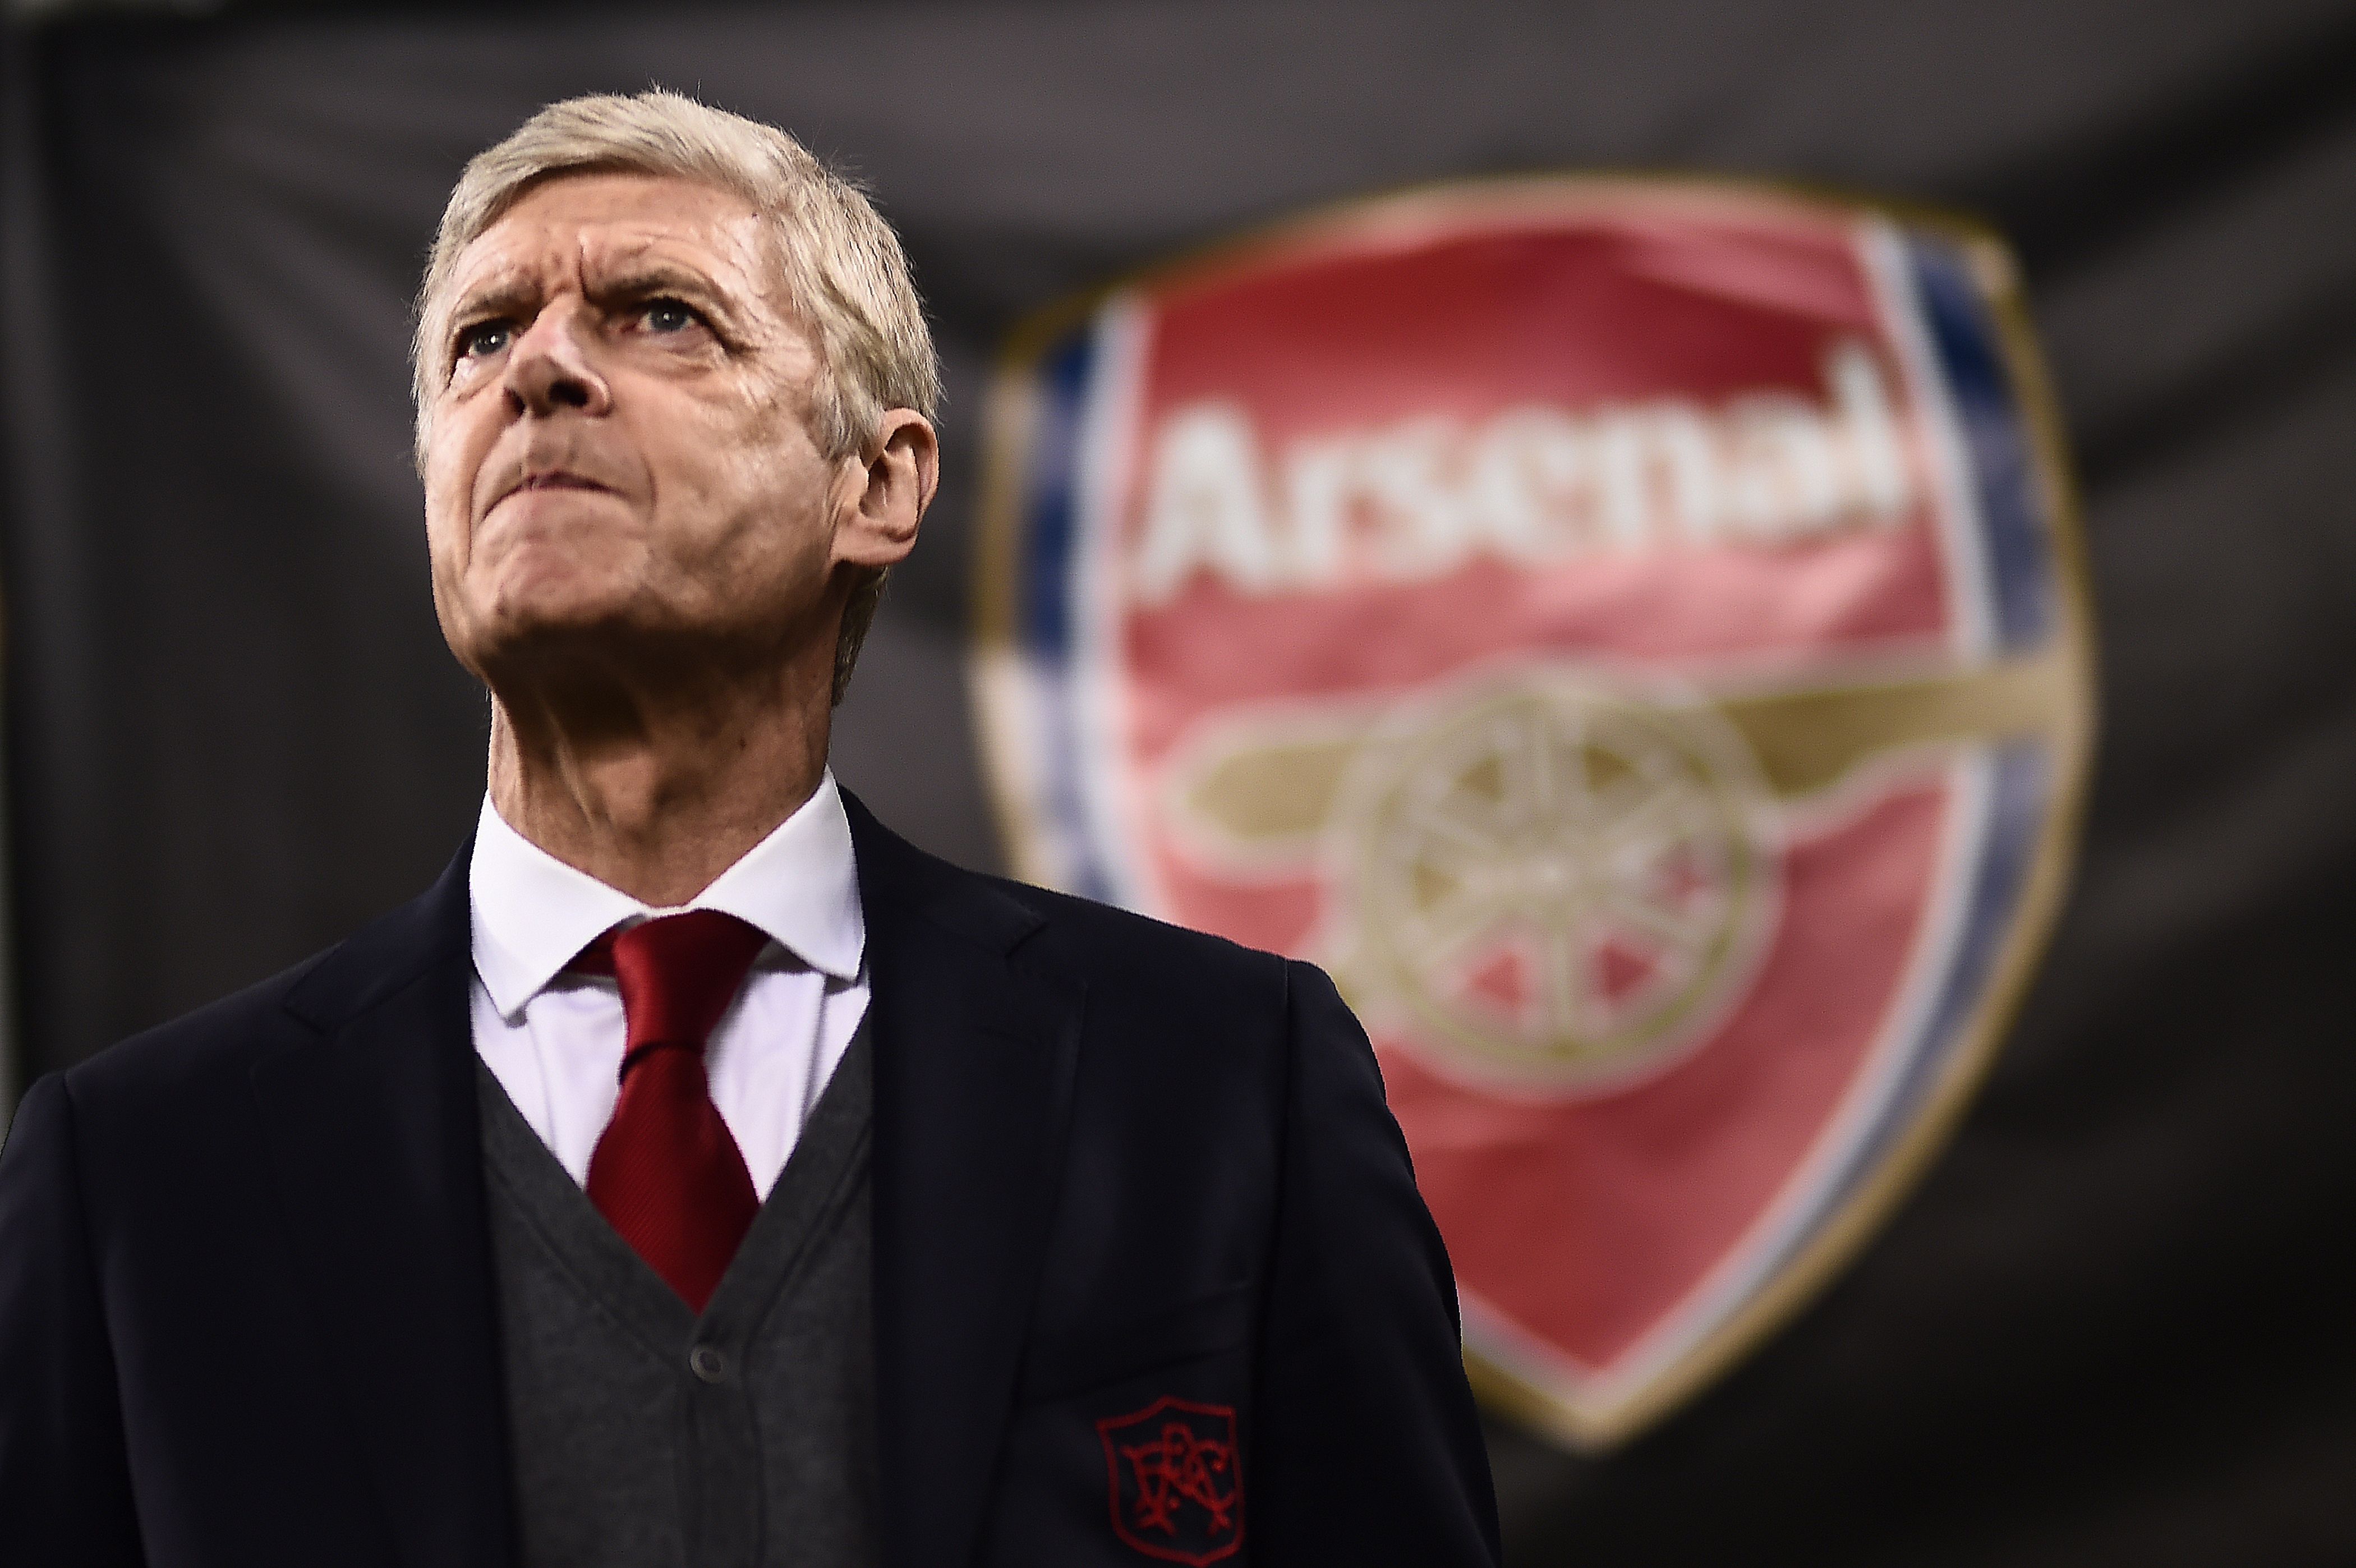 TOPSHOT - Arsenal's coach Arsene Wenger from France looks on during the UEFA Europa League round of 16 first-leg football match AC Milan Vs Arsenal at the 'San Siro Stadium' in Milan on March 8, 2018. / AFP PHOTO / MARCO BERTORELLO        (Photo credit should read MARCO BERTORELLO/AFP/Getty Images)